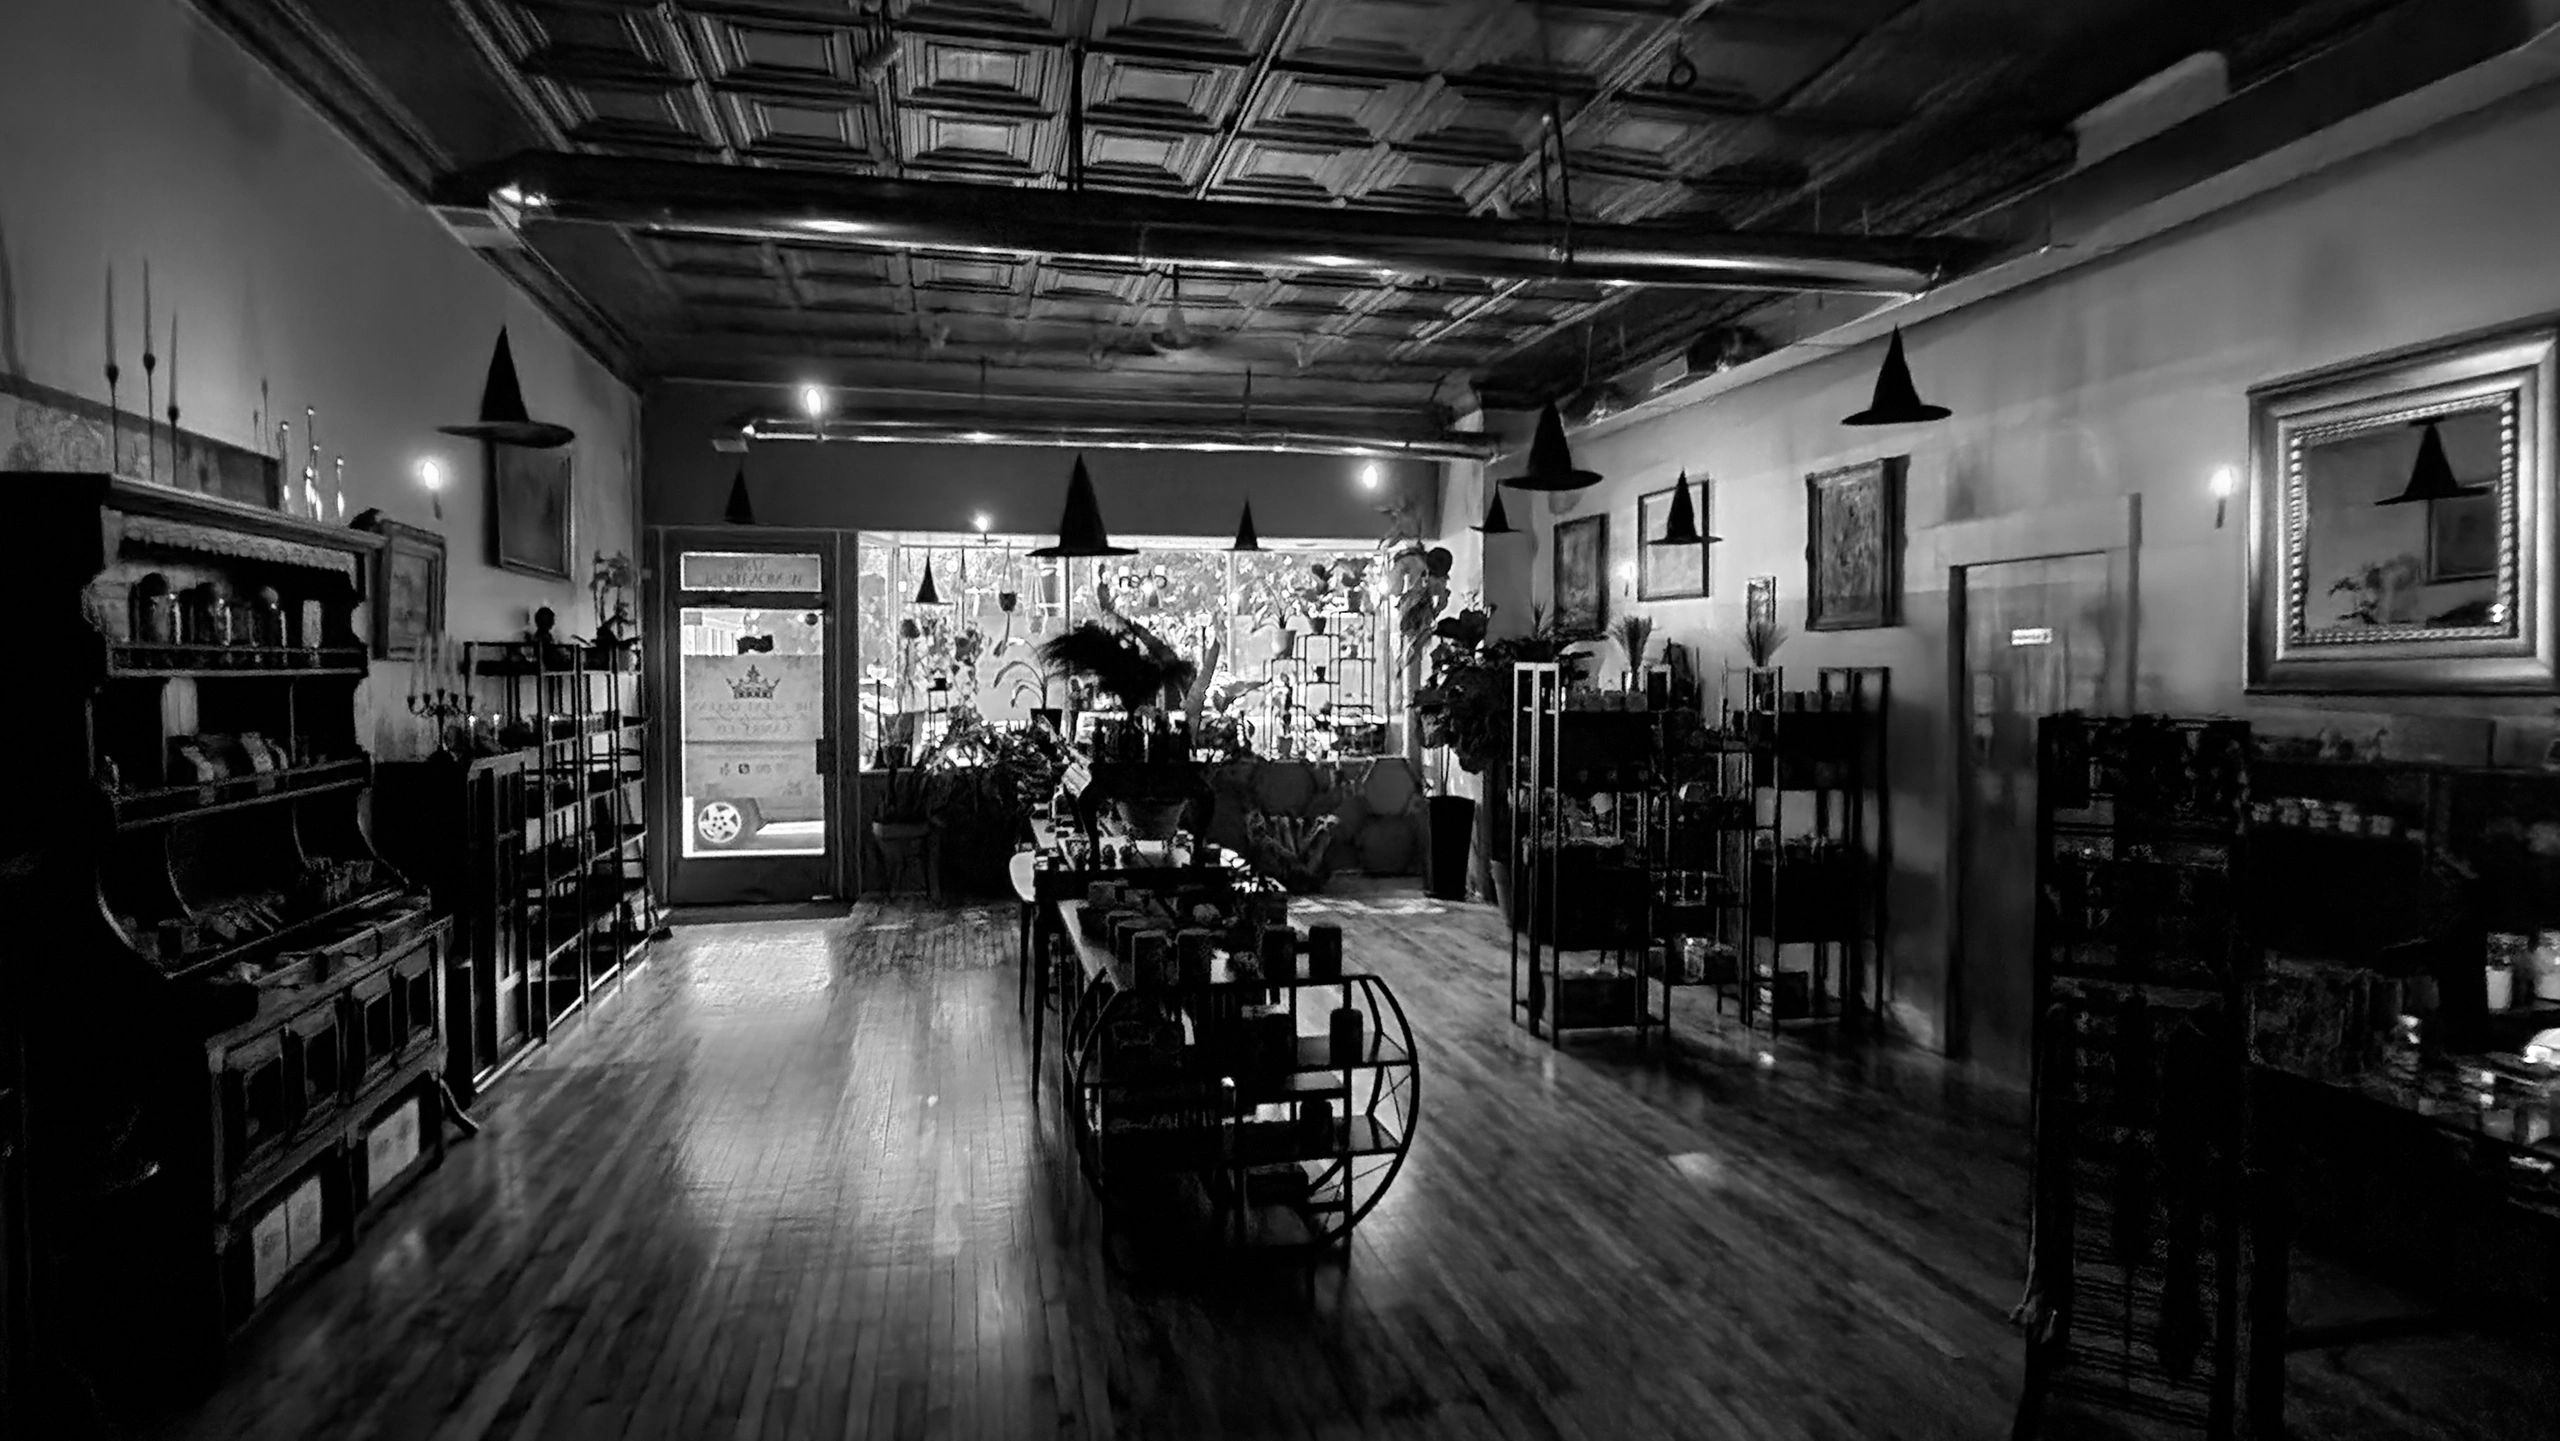 Actual image of our Apothecary Shoppe where we sell our candles.